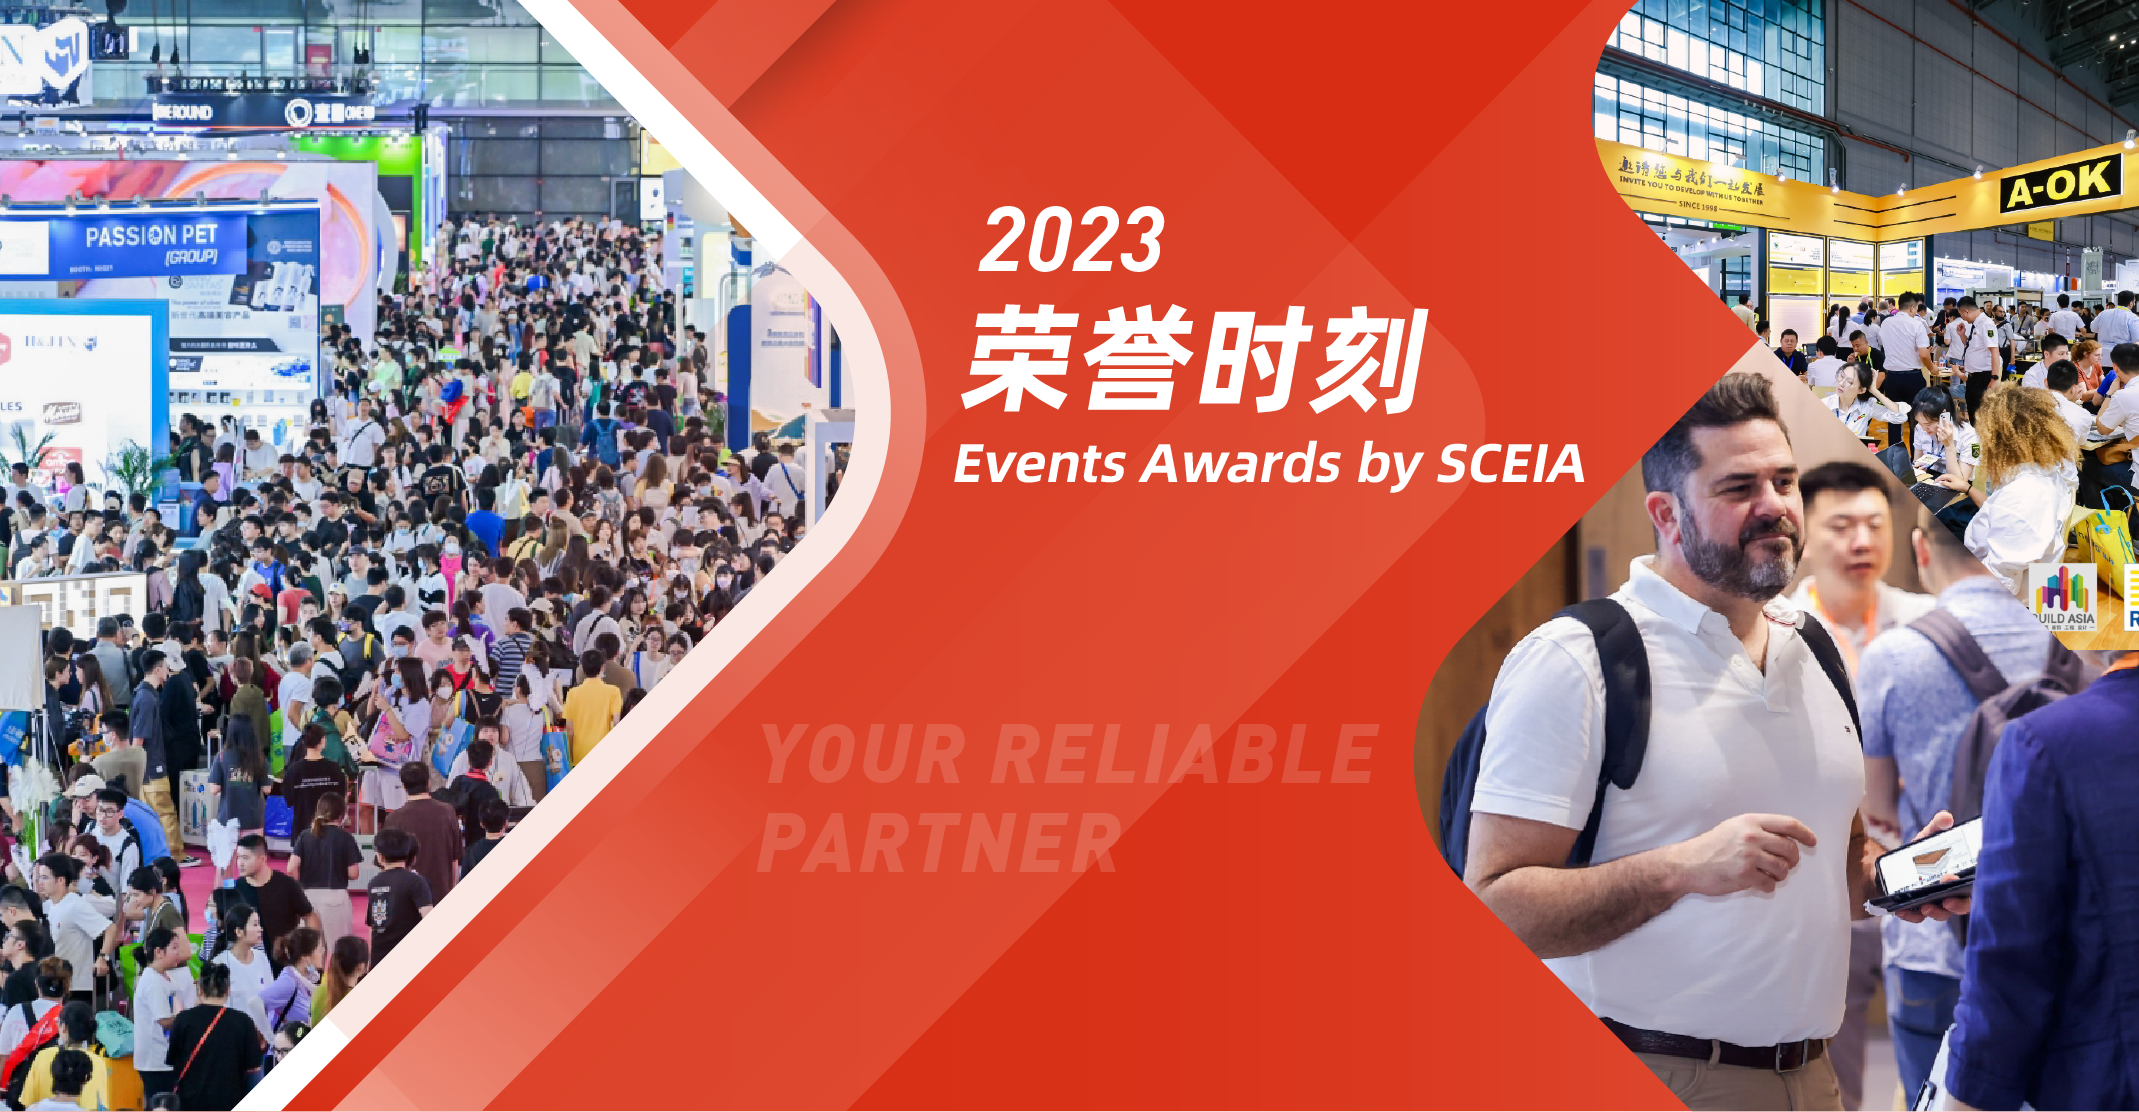 Multiple exhibitions awarded 2023 Year Exhibition by SCIEA